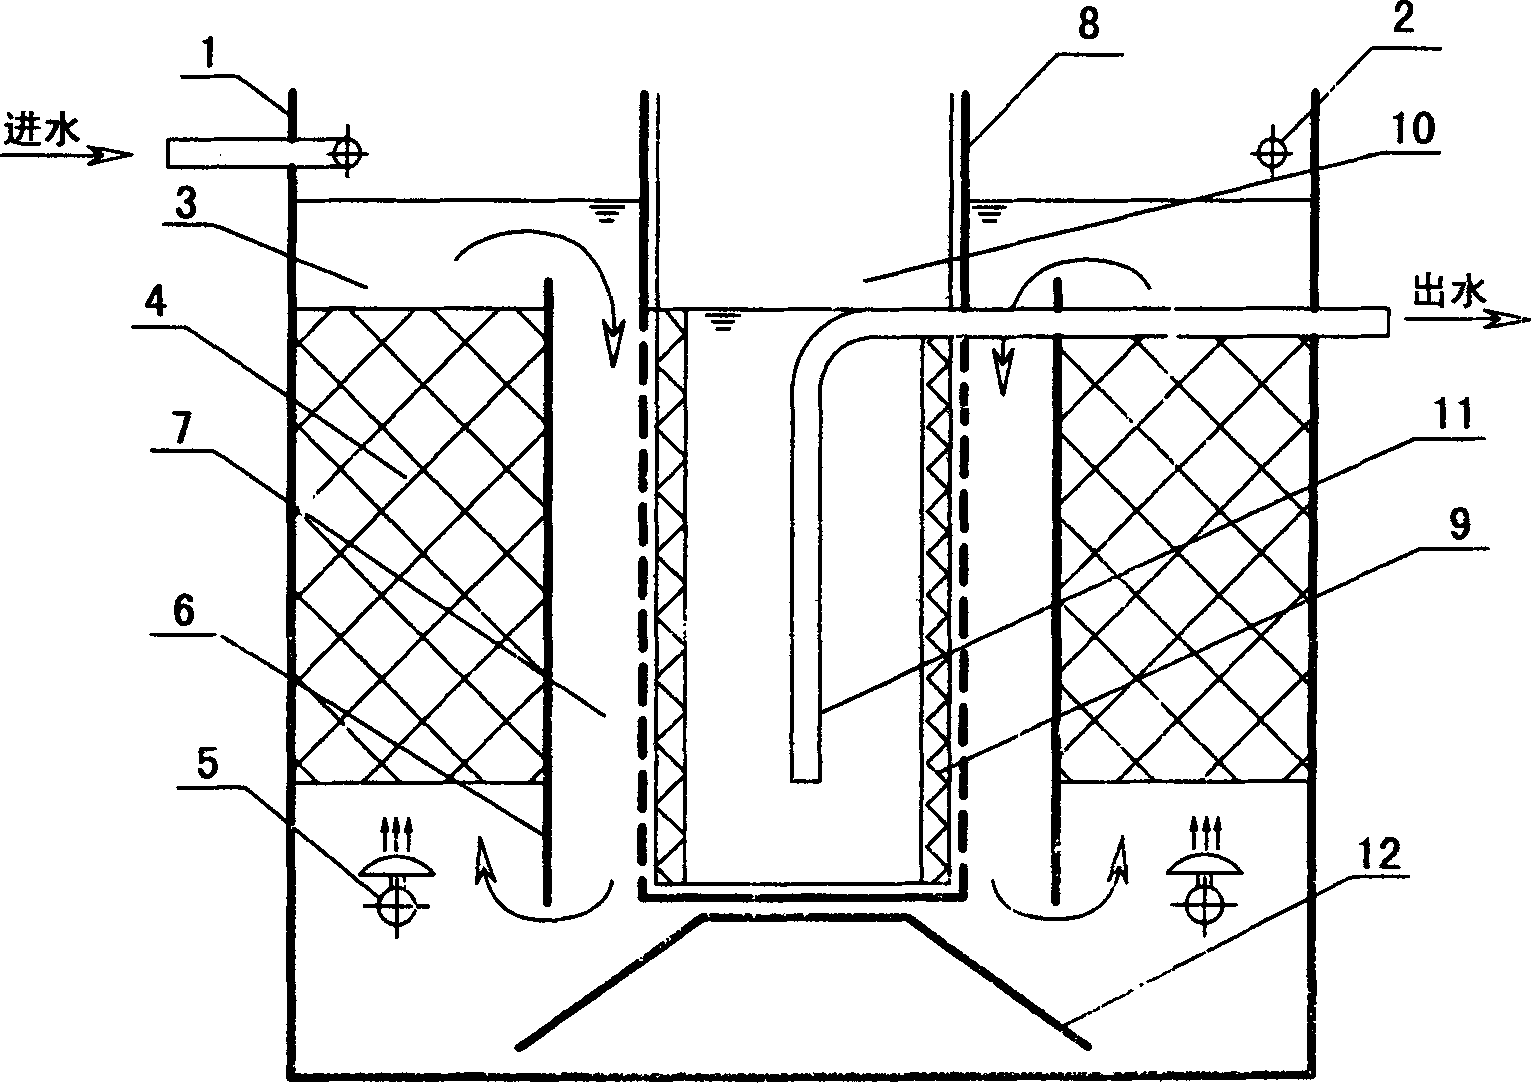 Self-forming dynamic membrane biological reaction sewage treatment device